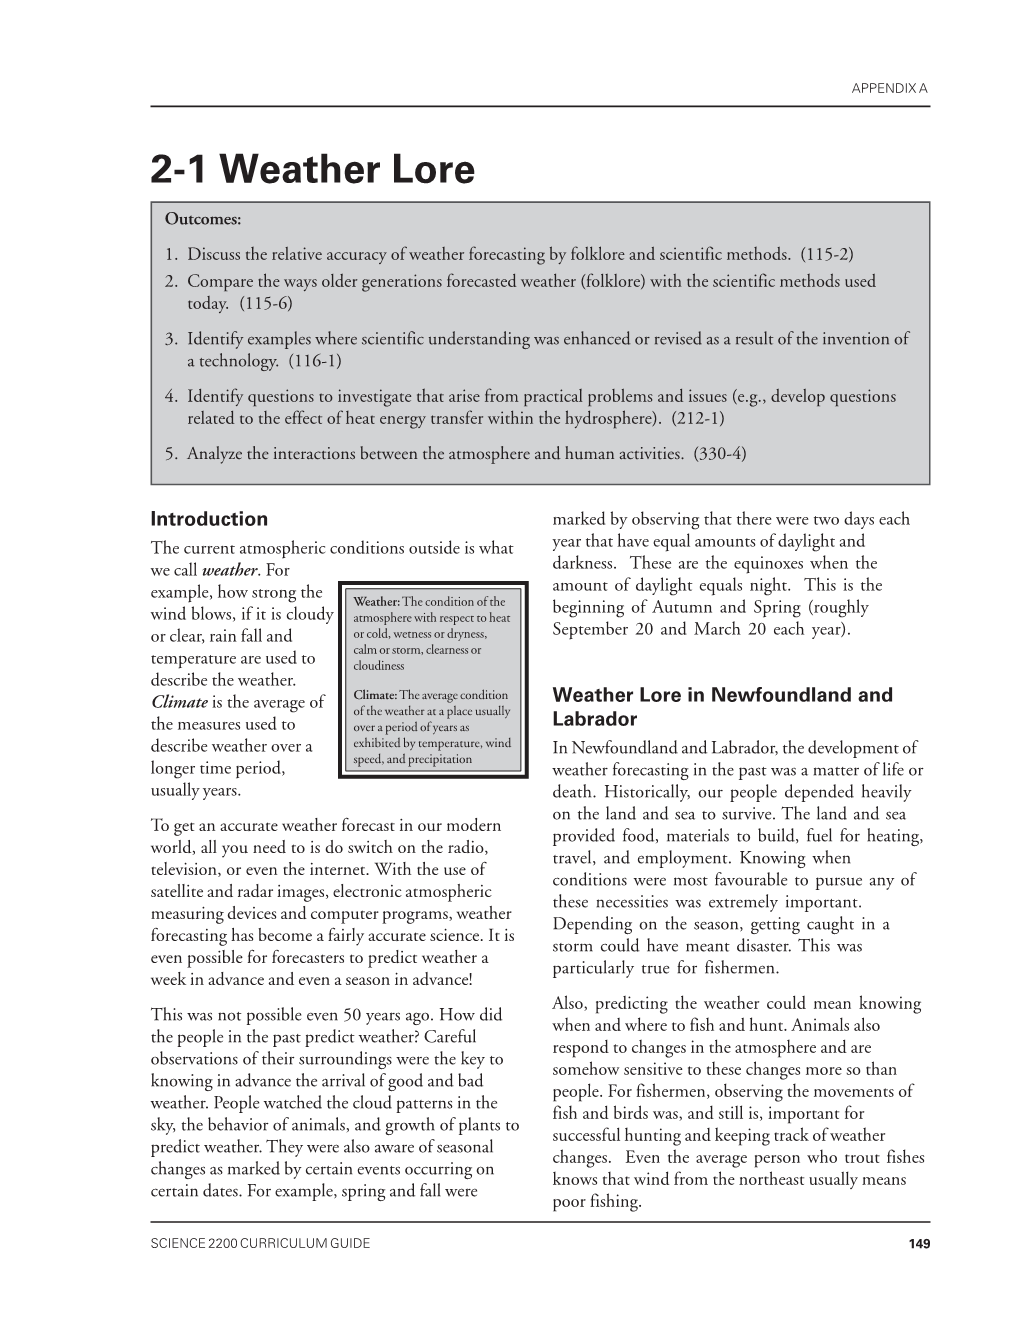 2-1 Weather Lore